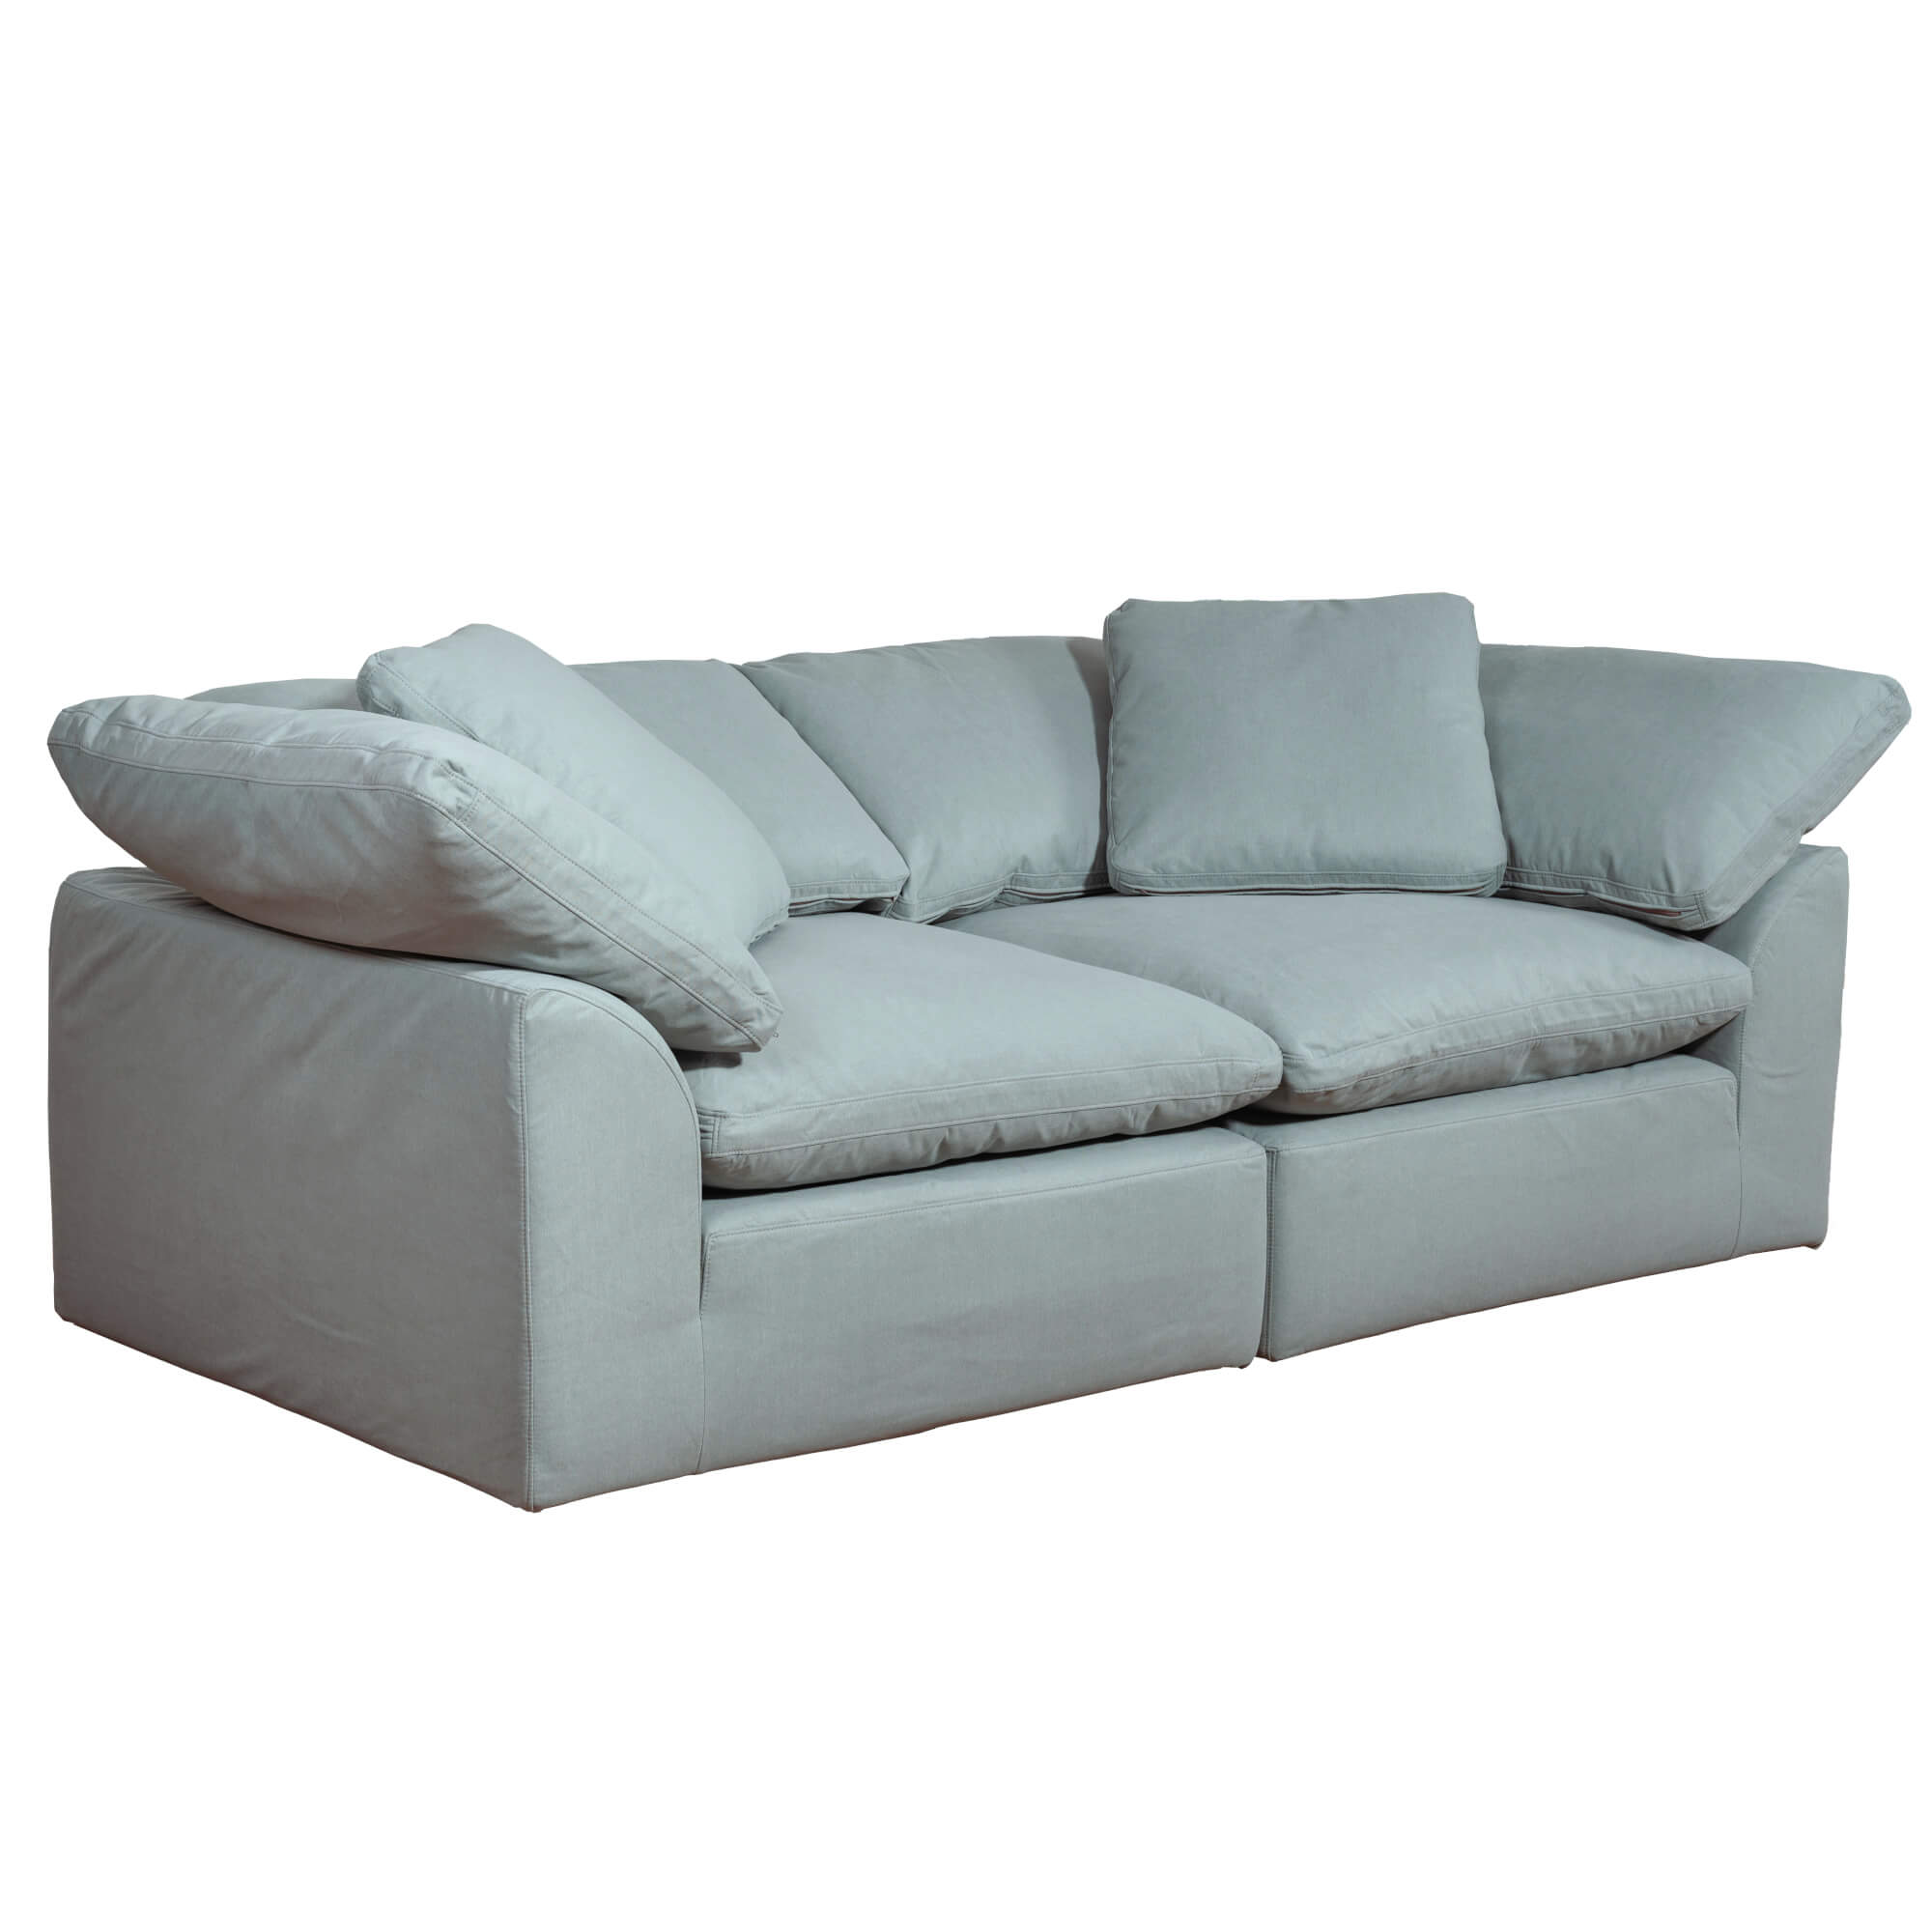 Cloud Puff Collection - Two Piece Sofa Sectional in Light Blue 391043-Angle view-SU-1458-43-2C